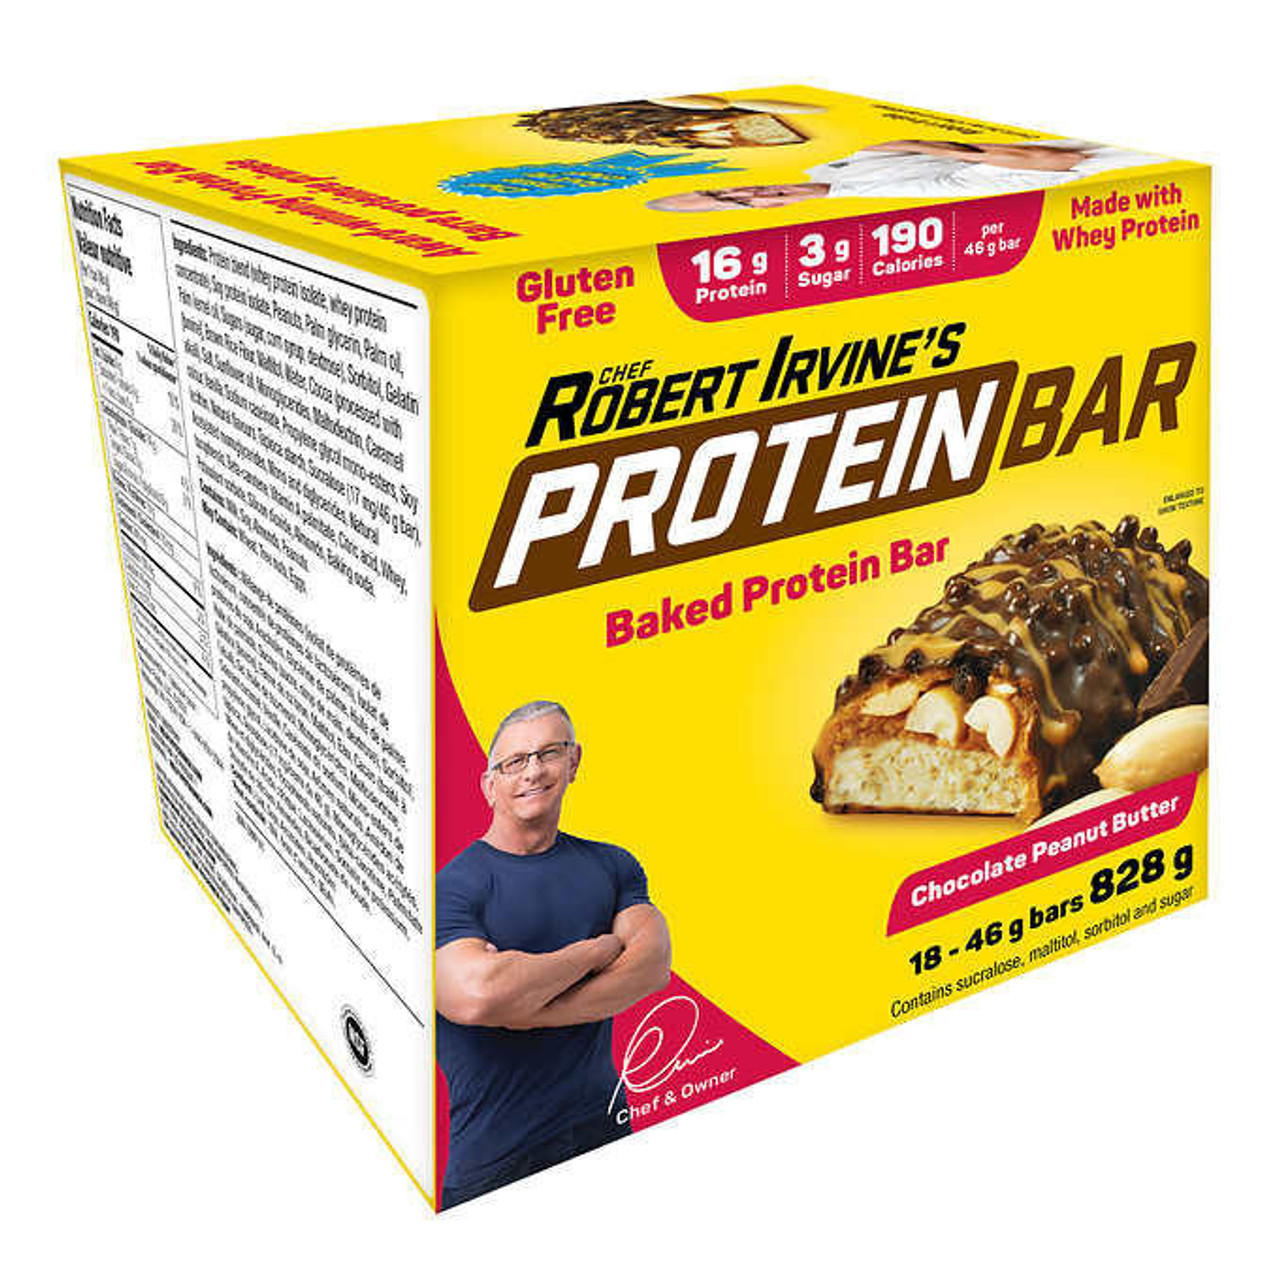  Chef Robert Irvine's Baked Protein Bars, Chocolate Peanut Butter 46g (6/Case) 